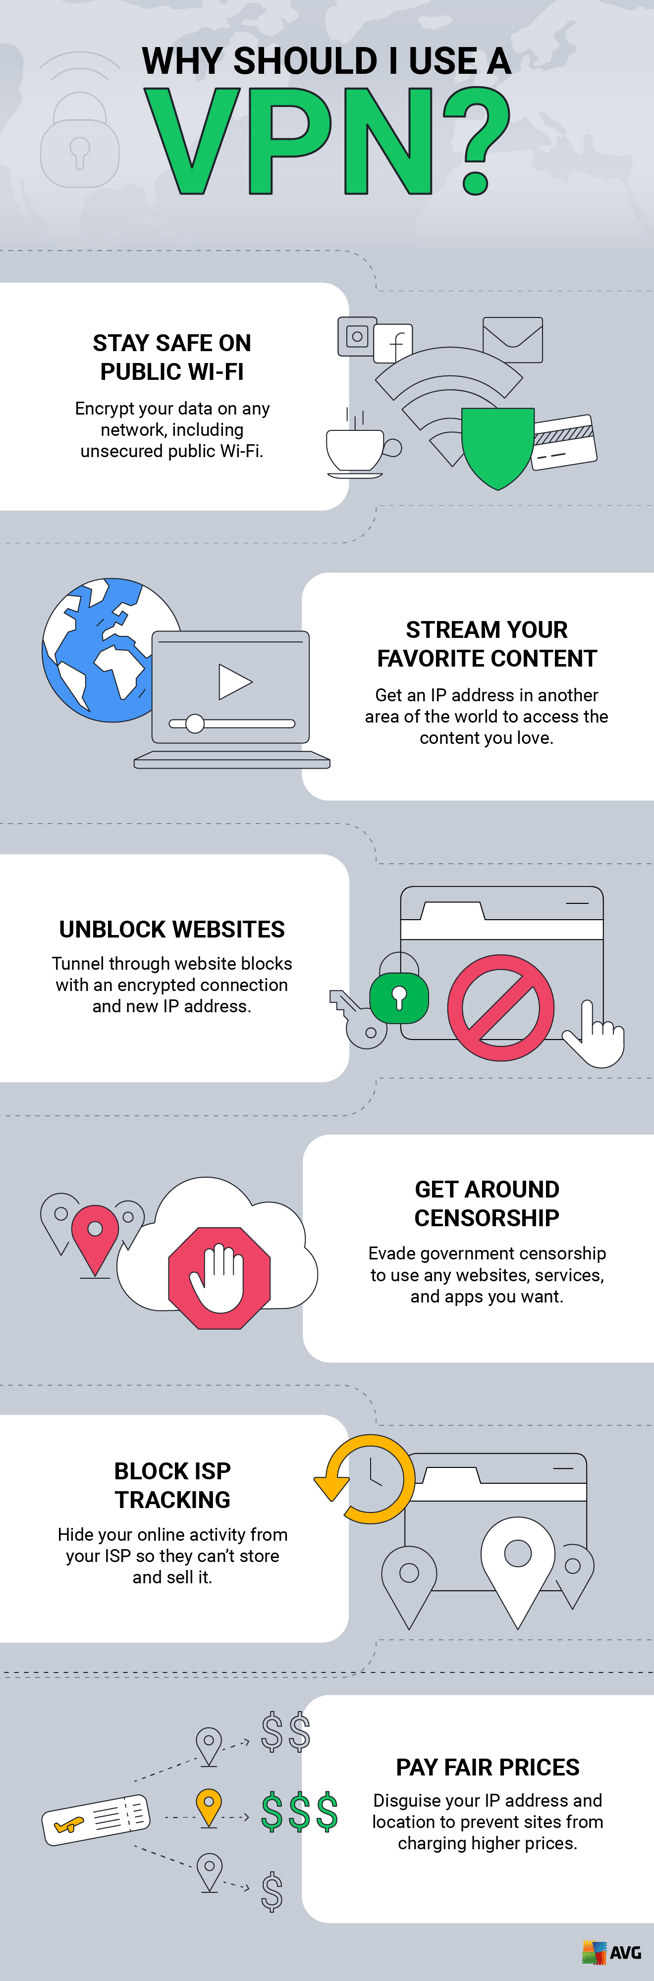 Use a VPN to stay safe on public Wi-Fi, unblock content, bypass censorship, stop ISP tracking, and pay fair prices.